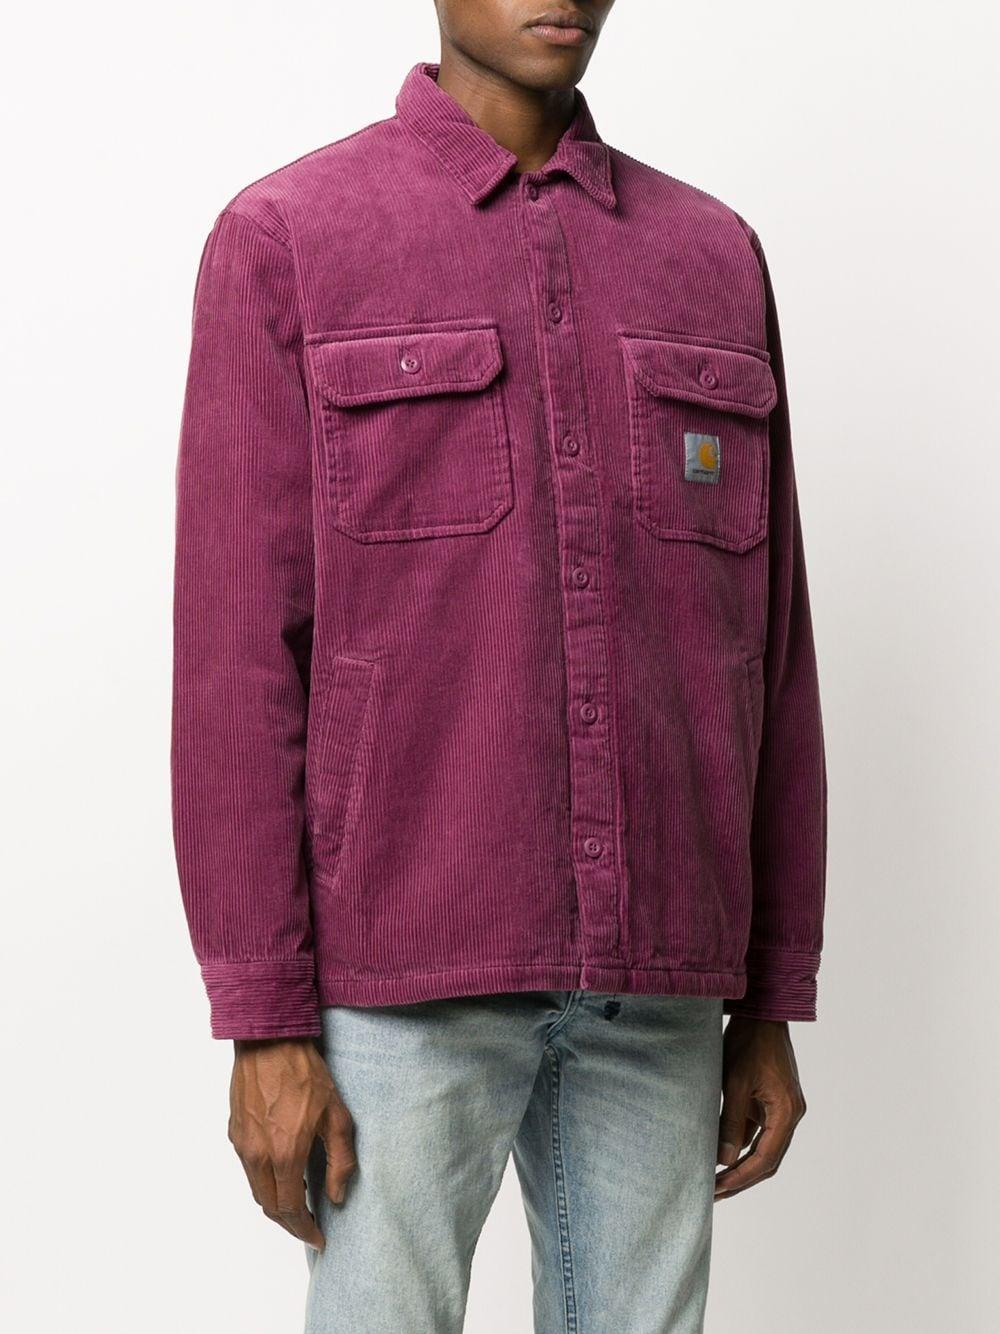 Carhartt WIP Whitsome Corduroy Shirt Jacket in Purple for Men 